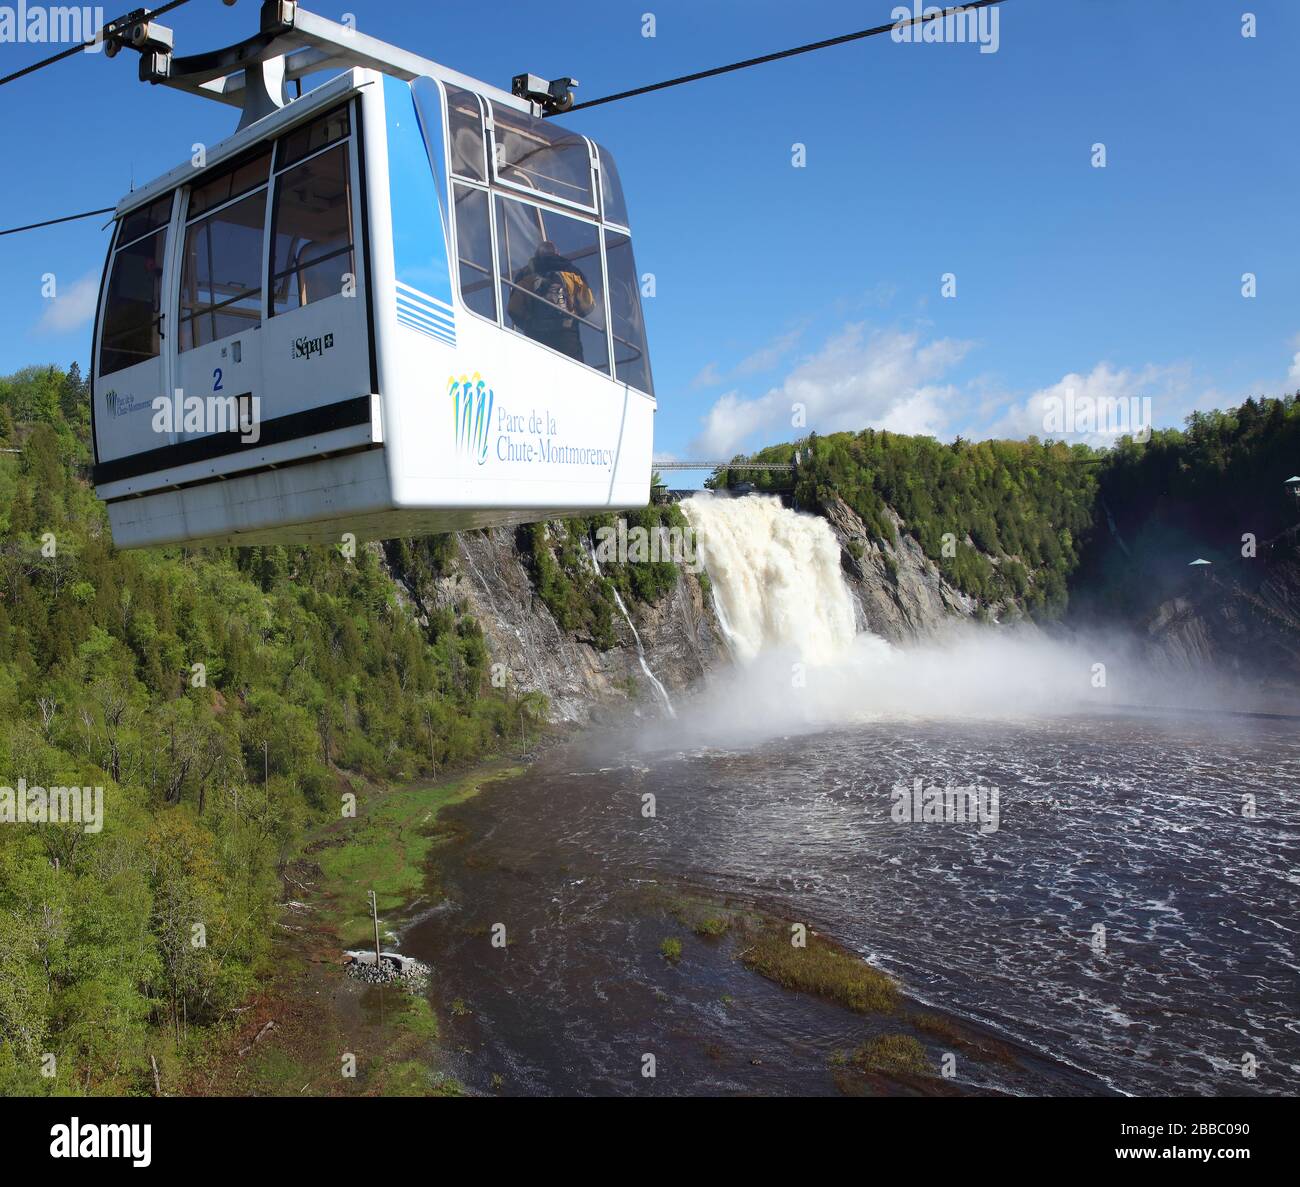 Cable car taking visitors up to the head of the Montmorency Falls in Parc de la Chute-Montmorency near Quebec City, Quebec, Canada Stock Photo